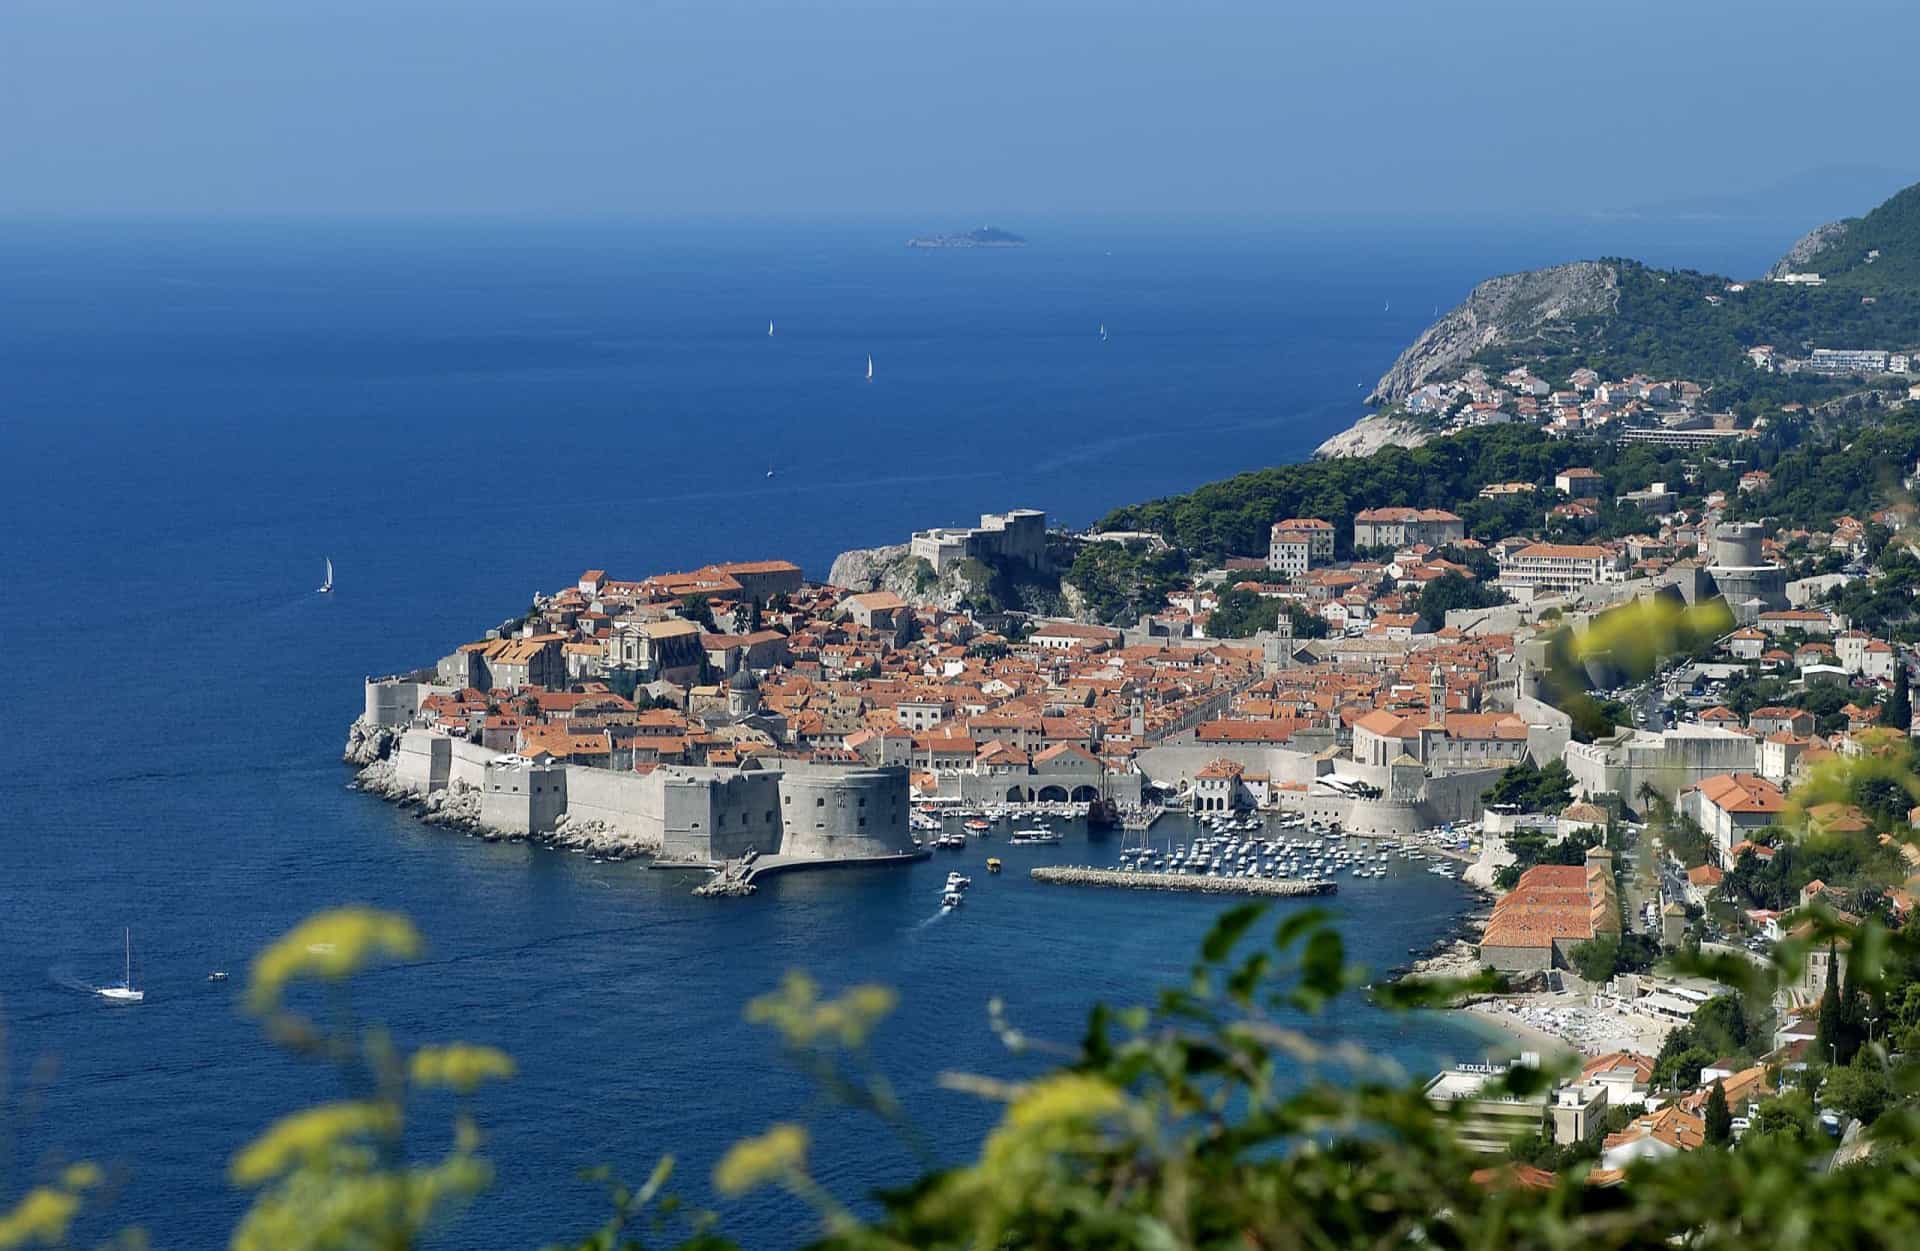 <p>This charming city on the Adriatic coast became a tourist hotspot around 2005. Teeming with history and beautiful sights, Dubrovnik remains popular to this day. </p>